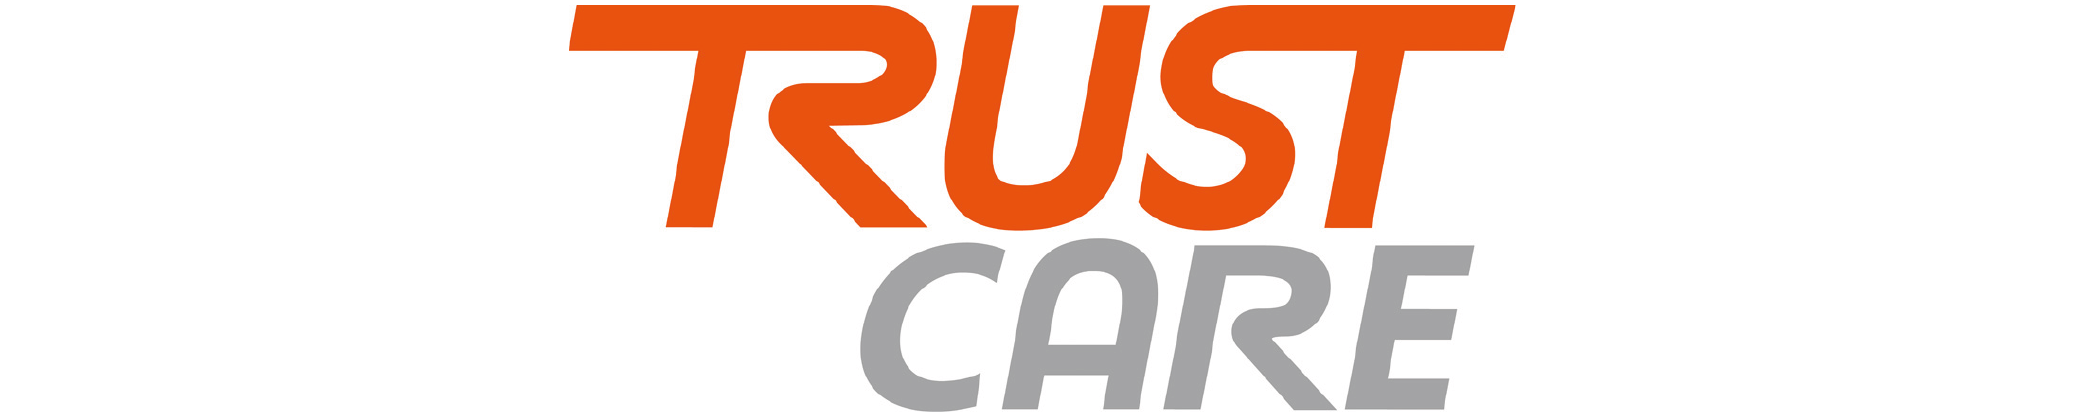 TrustCare-logo.png